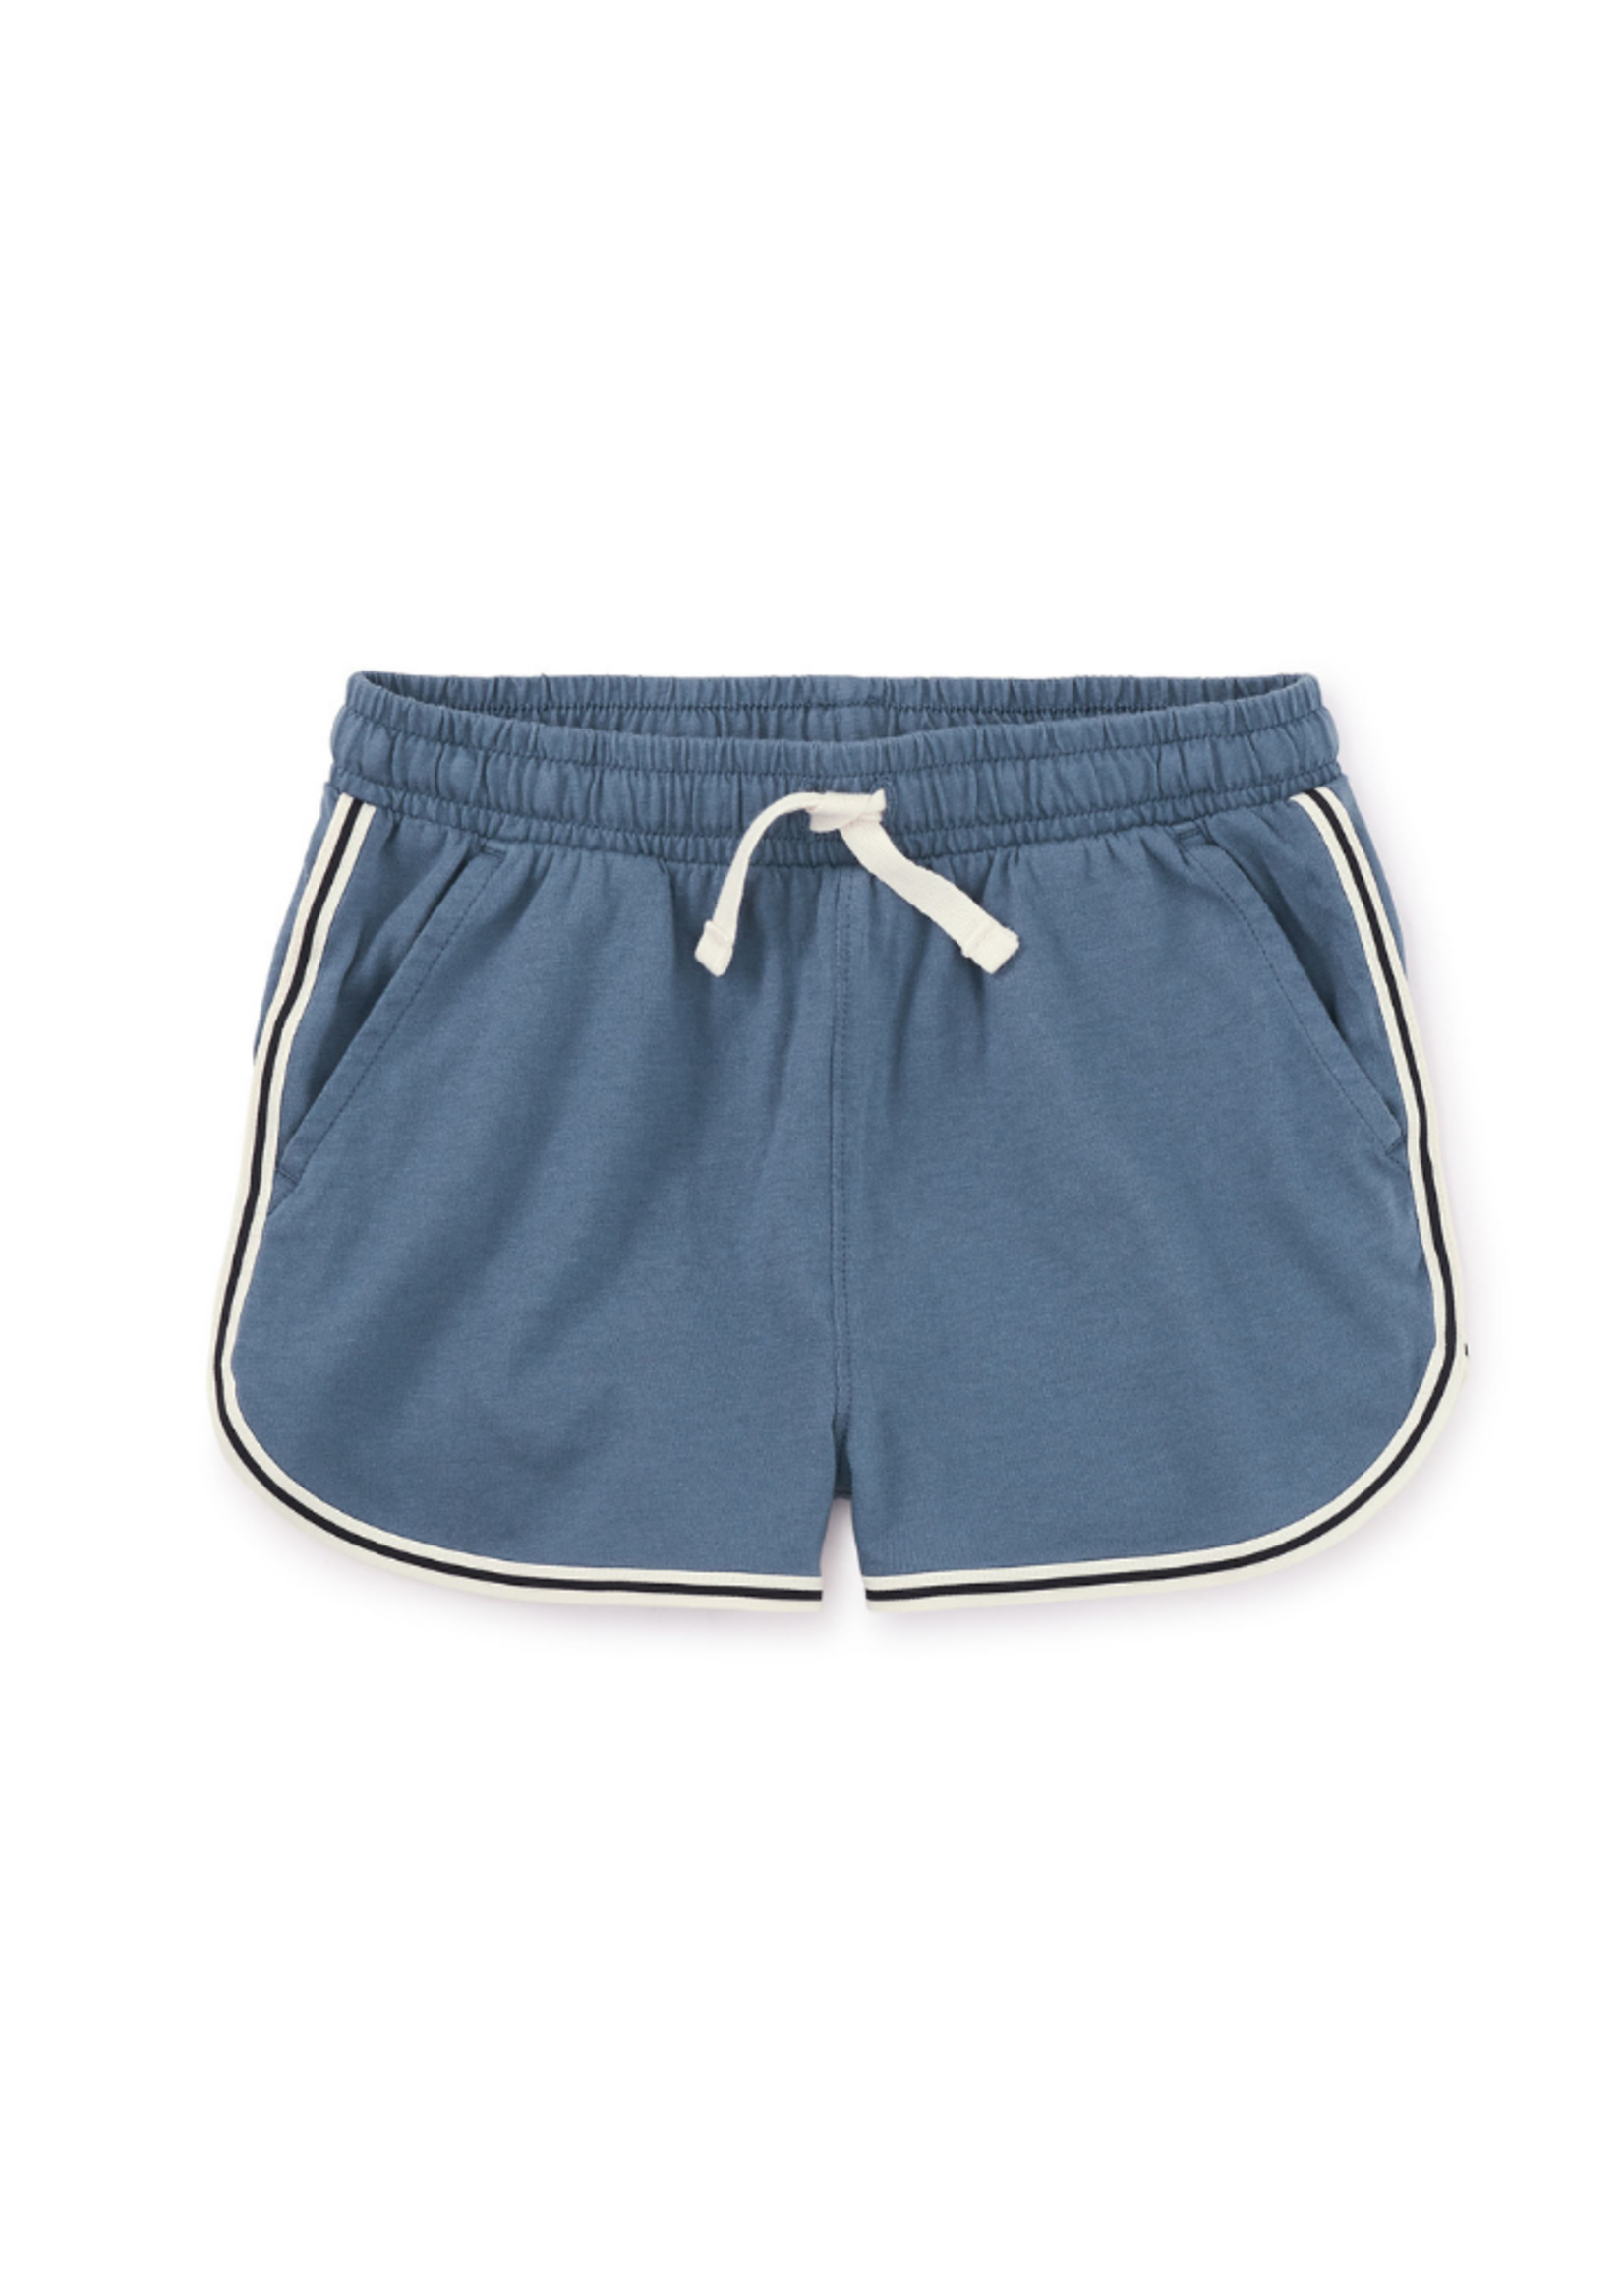 Tea Collection Striped Binding Track Shorts